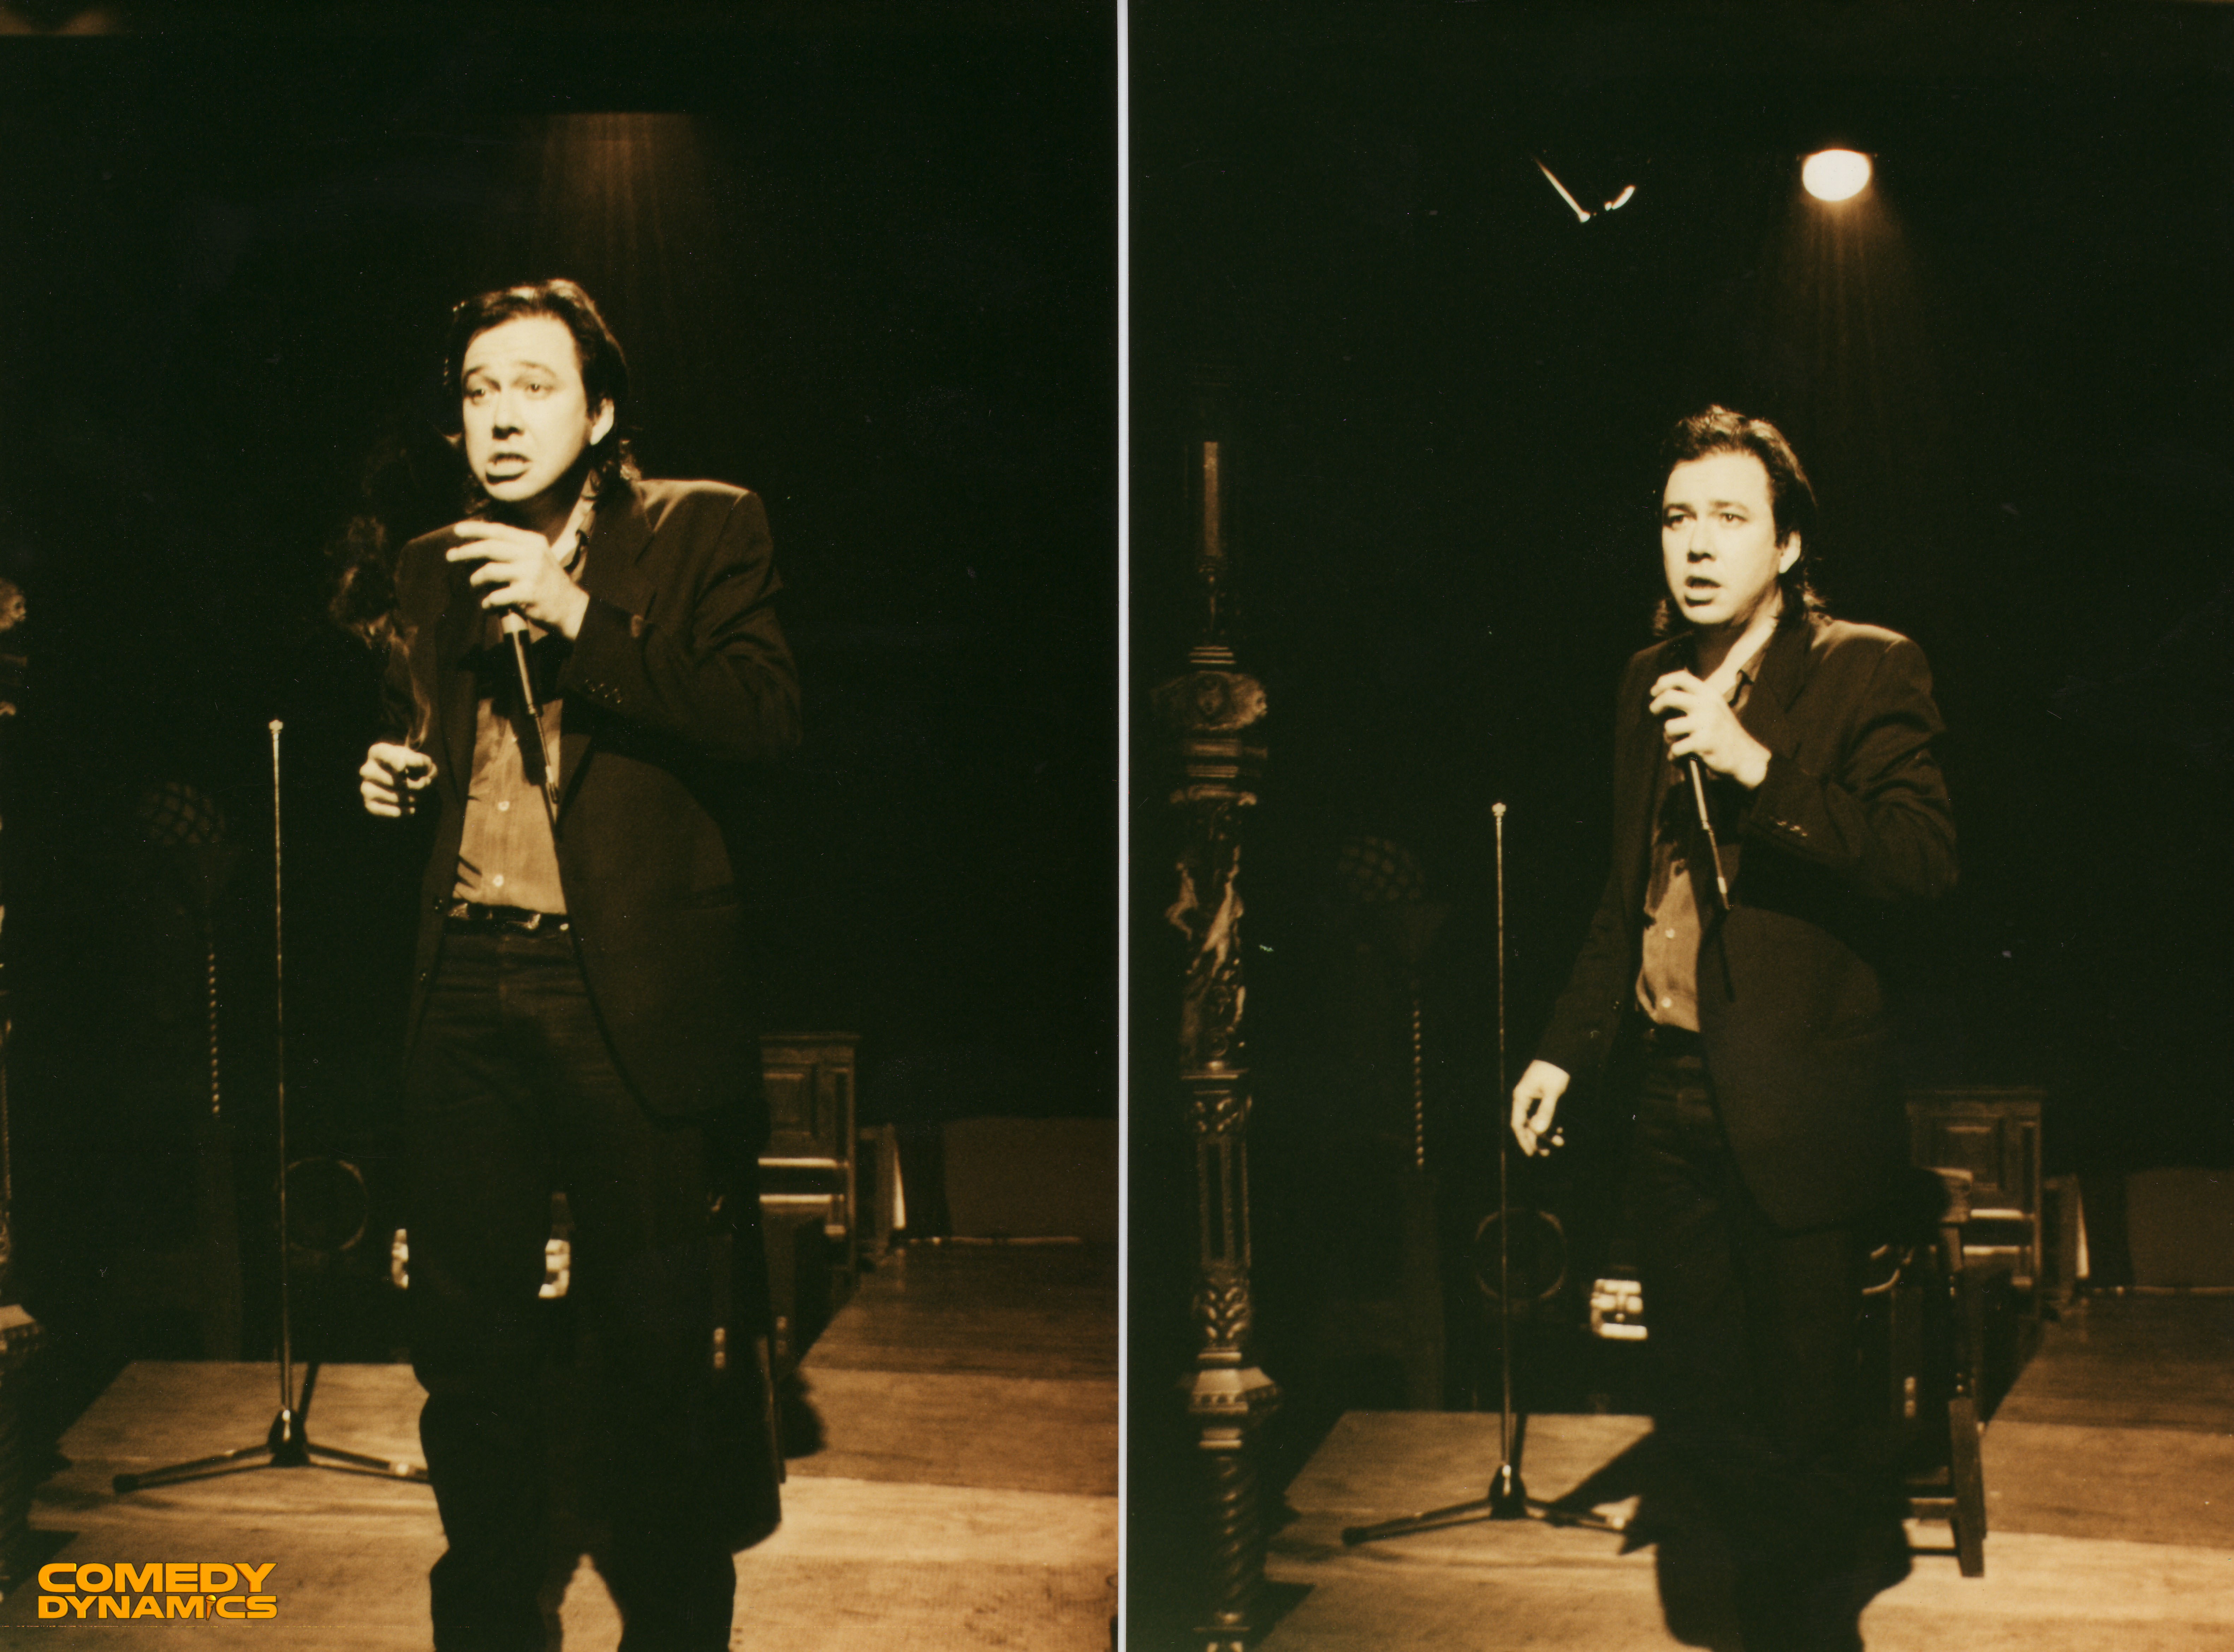 The estate of Bill Hicks reissuing his comedy discography, unearthing unreleased material